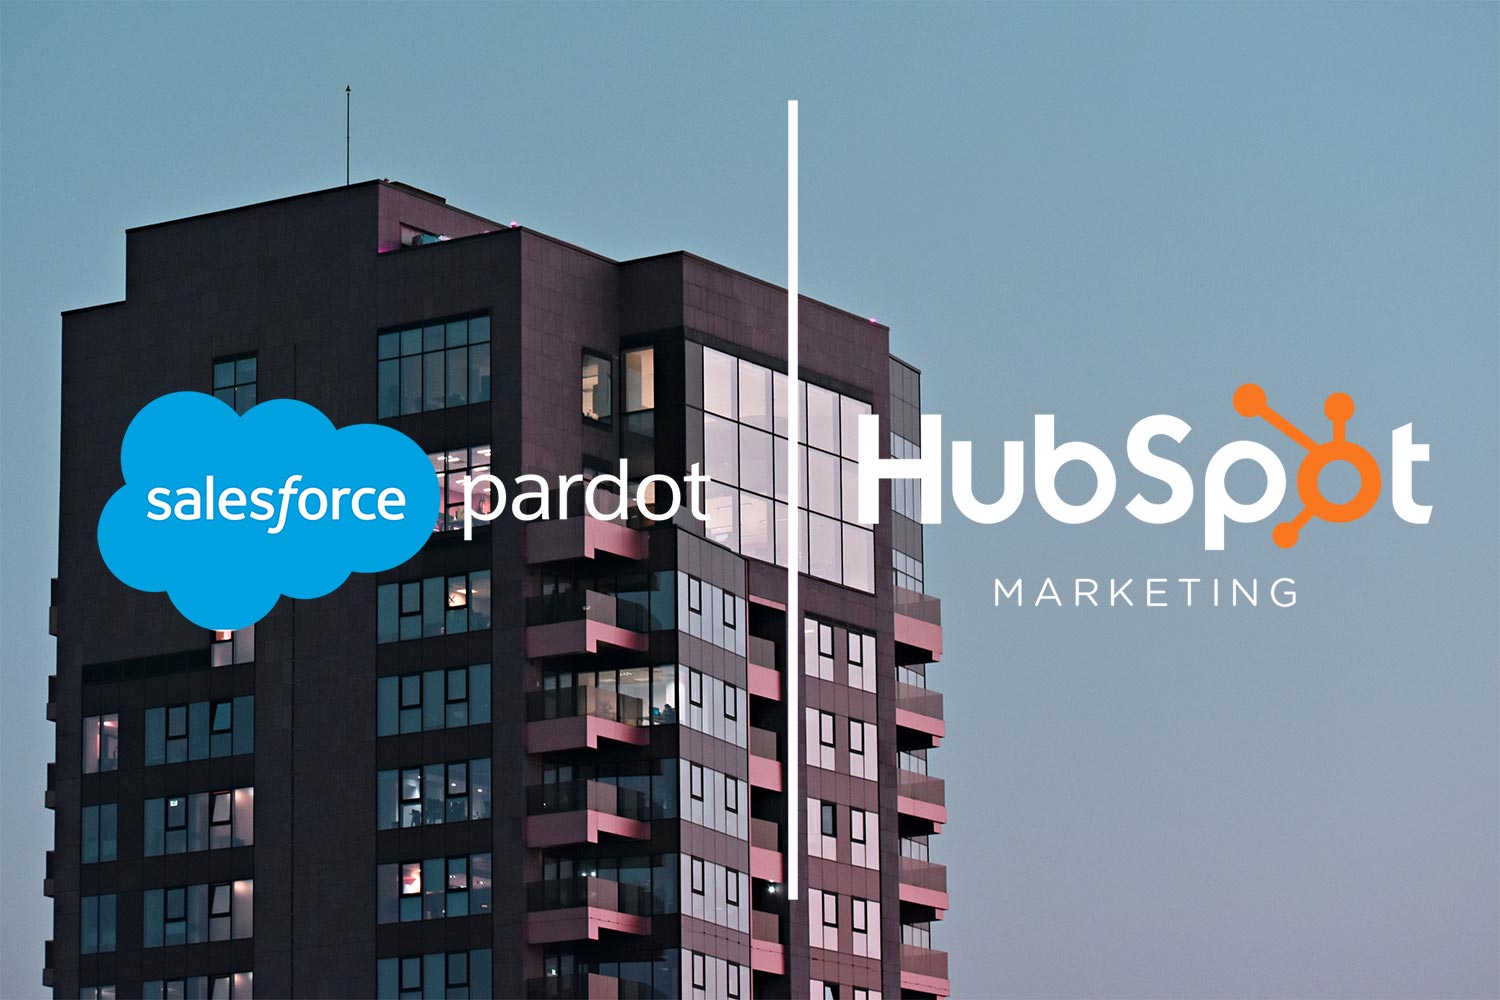 Salesforce Pardot and Hubspot Marketing logos in front of a large high rise office building